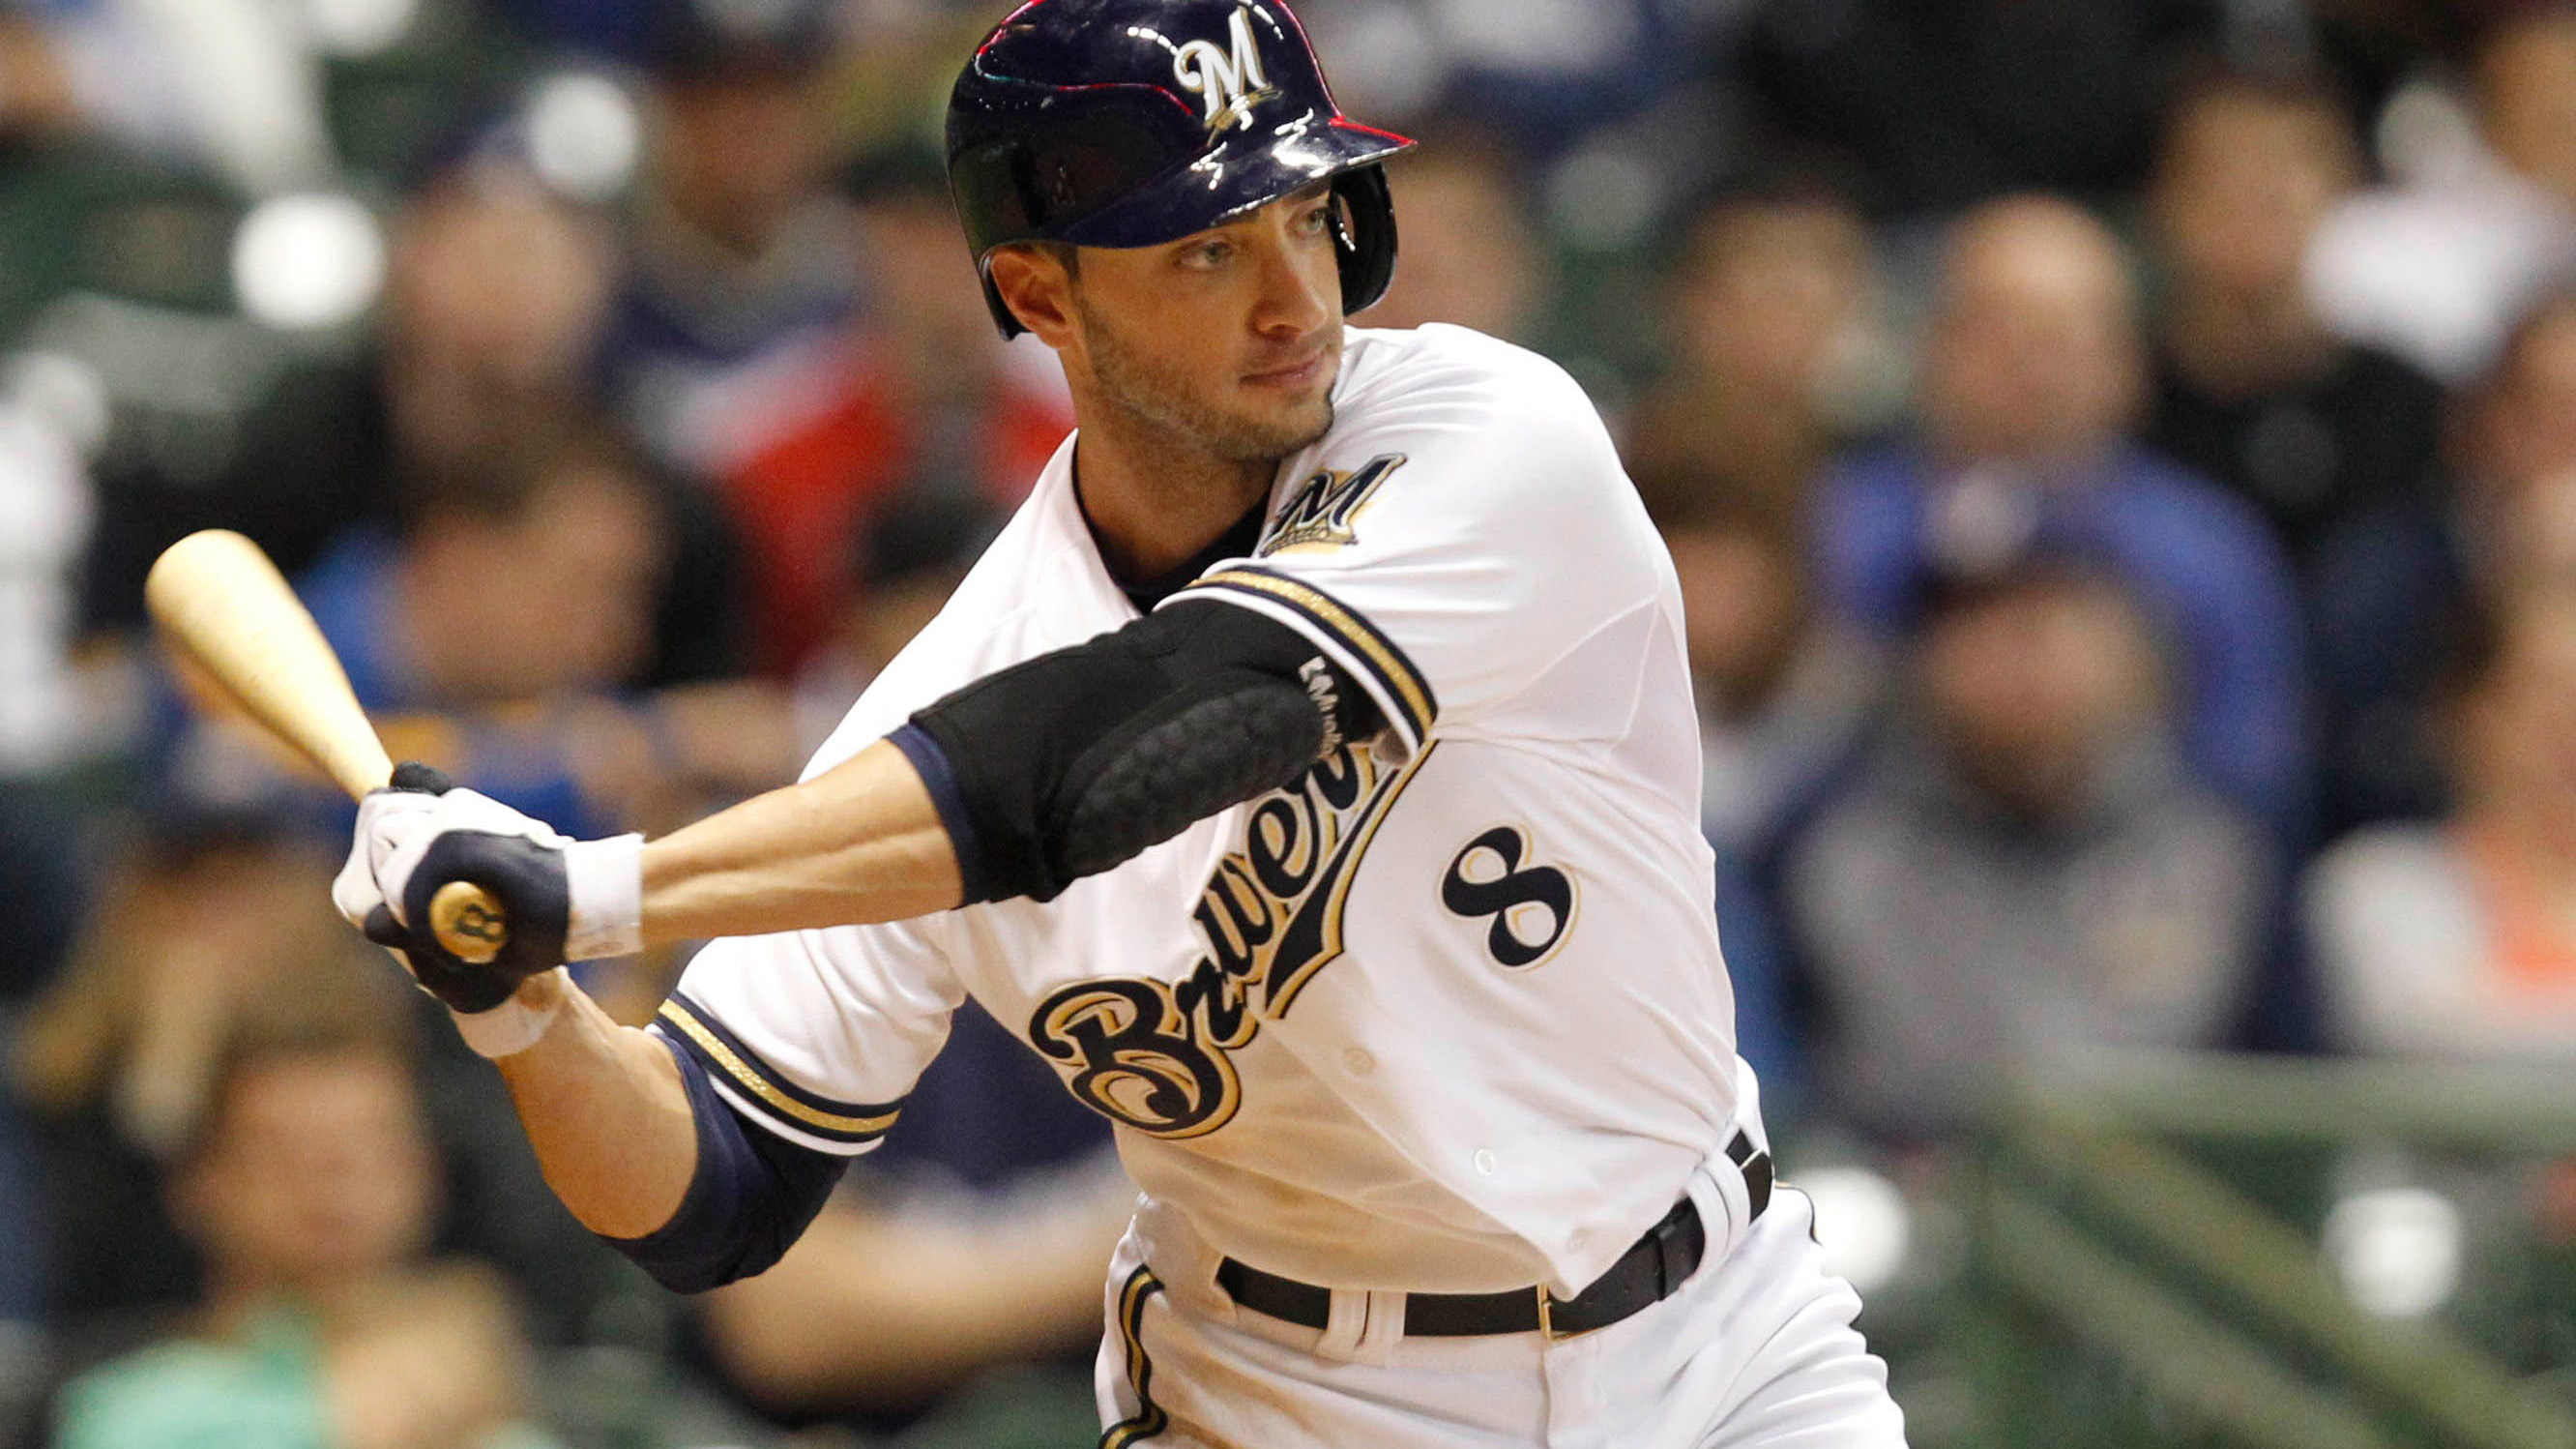 Ryan Braun announces his retirement after 14 years with the Brewers